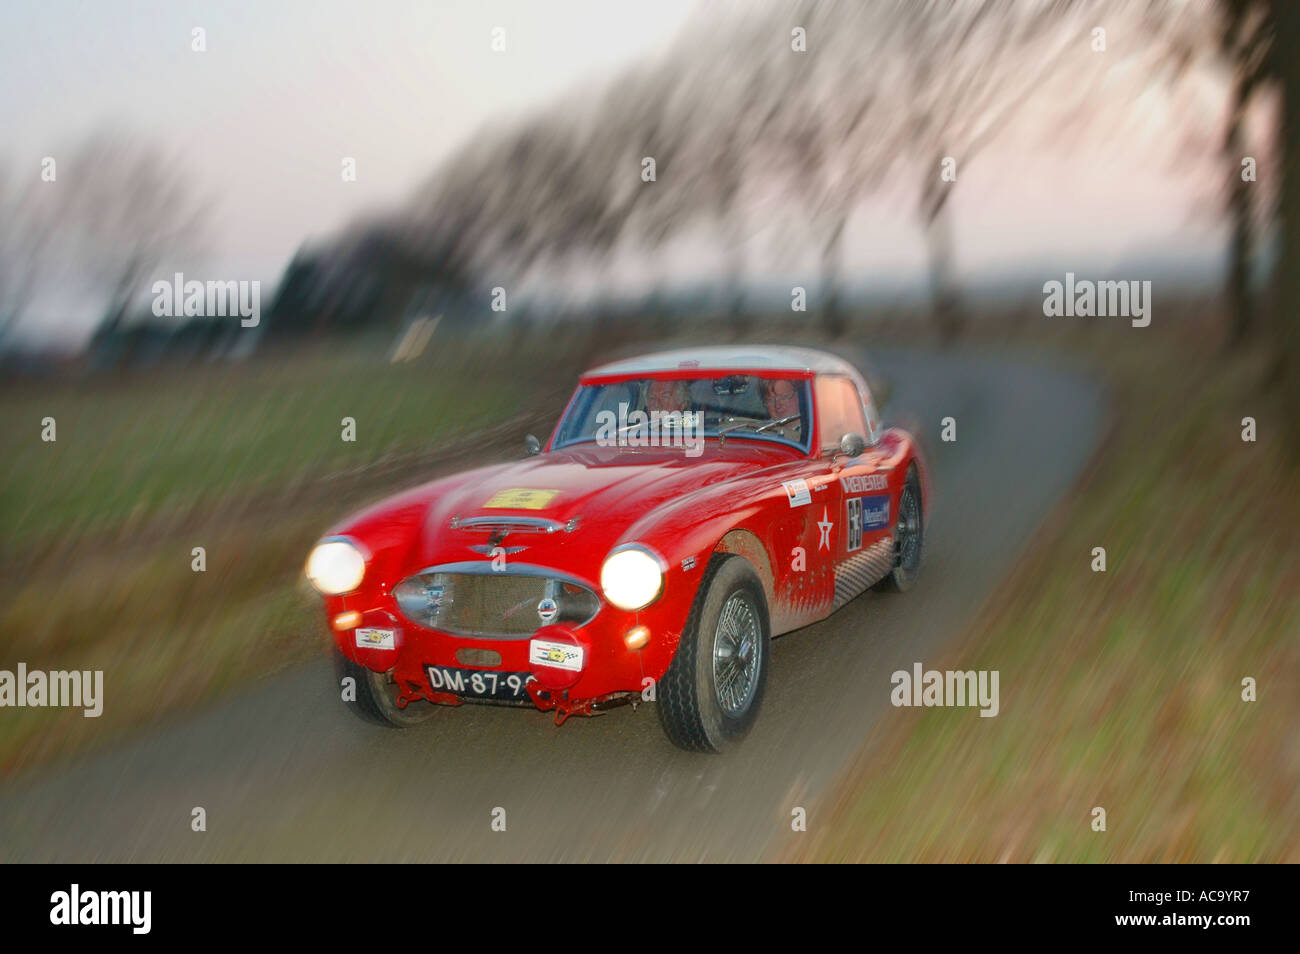 Front three quarter view of Red Austin Healey 100/6 rally car at speed on tree-lined tarmac road at dusk with motion streaks Stock Photo